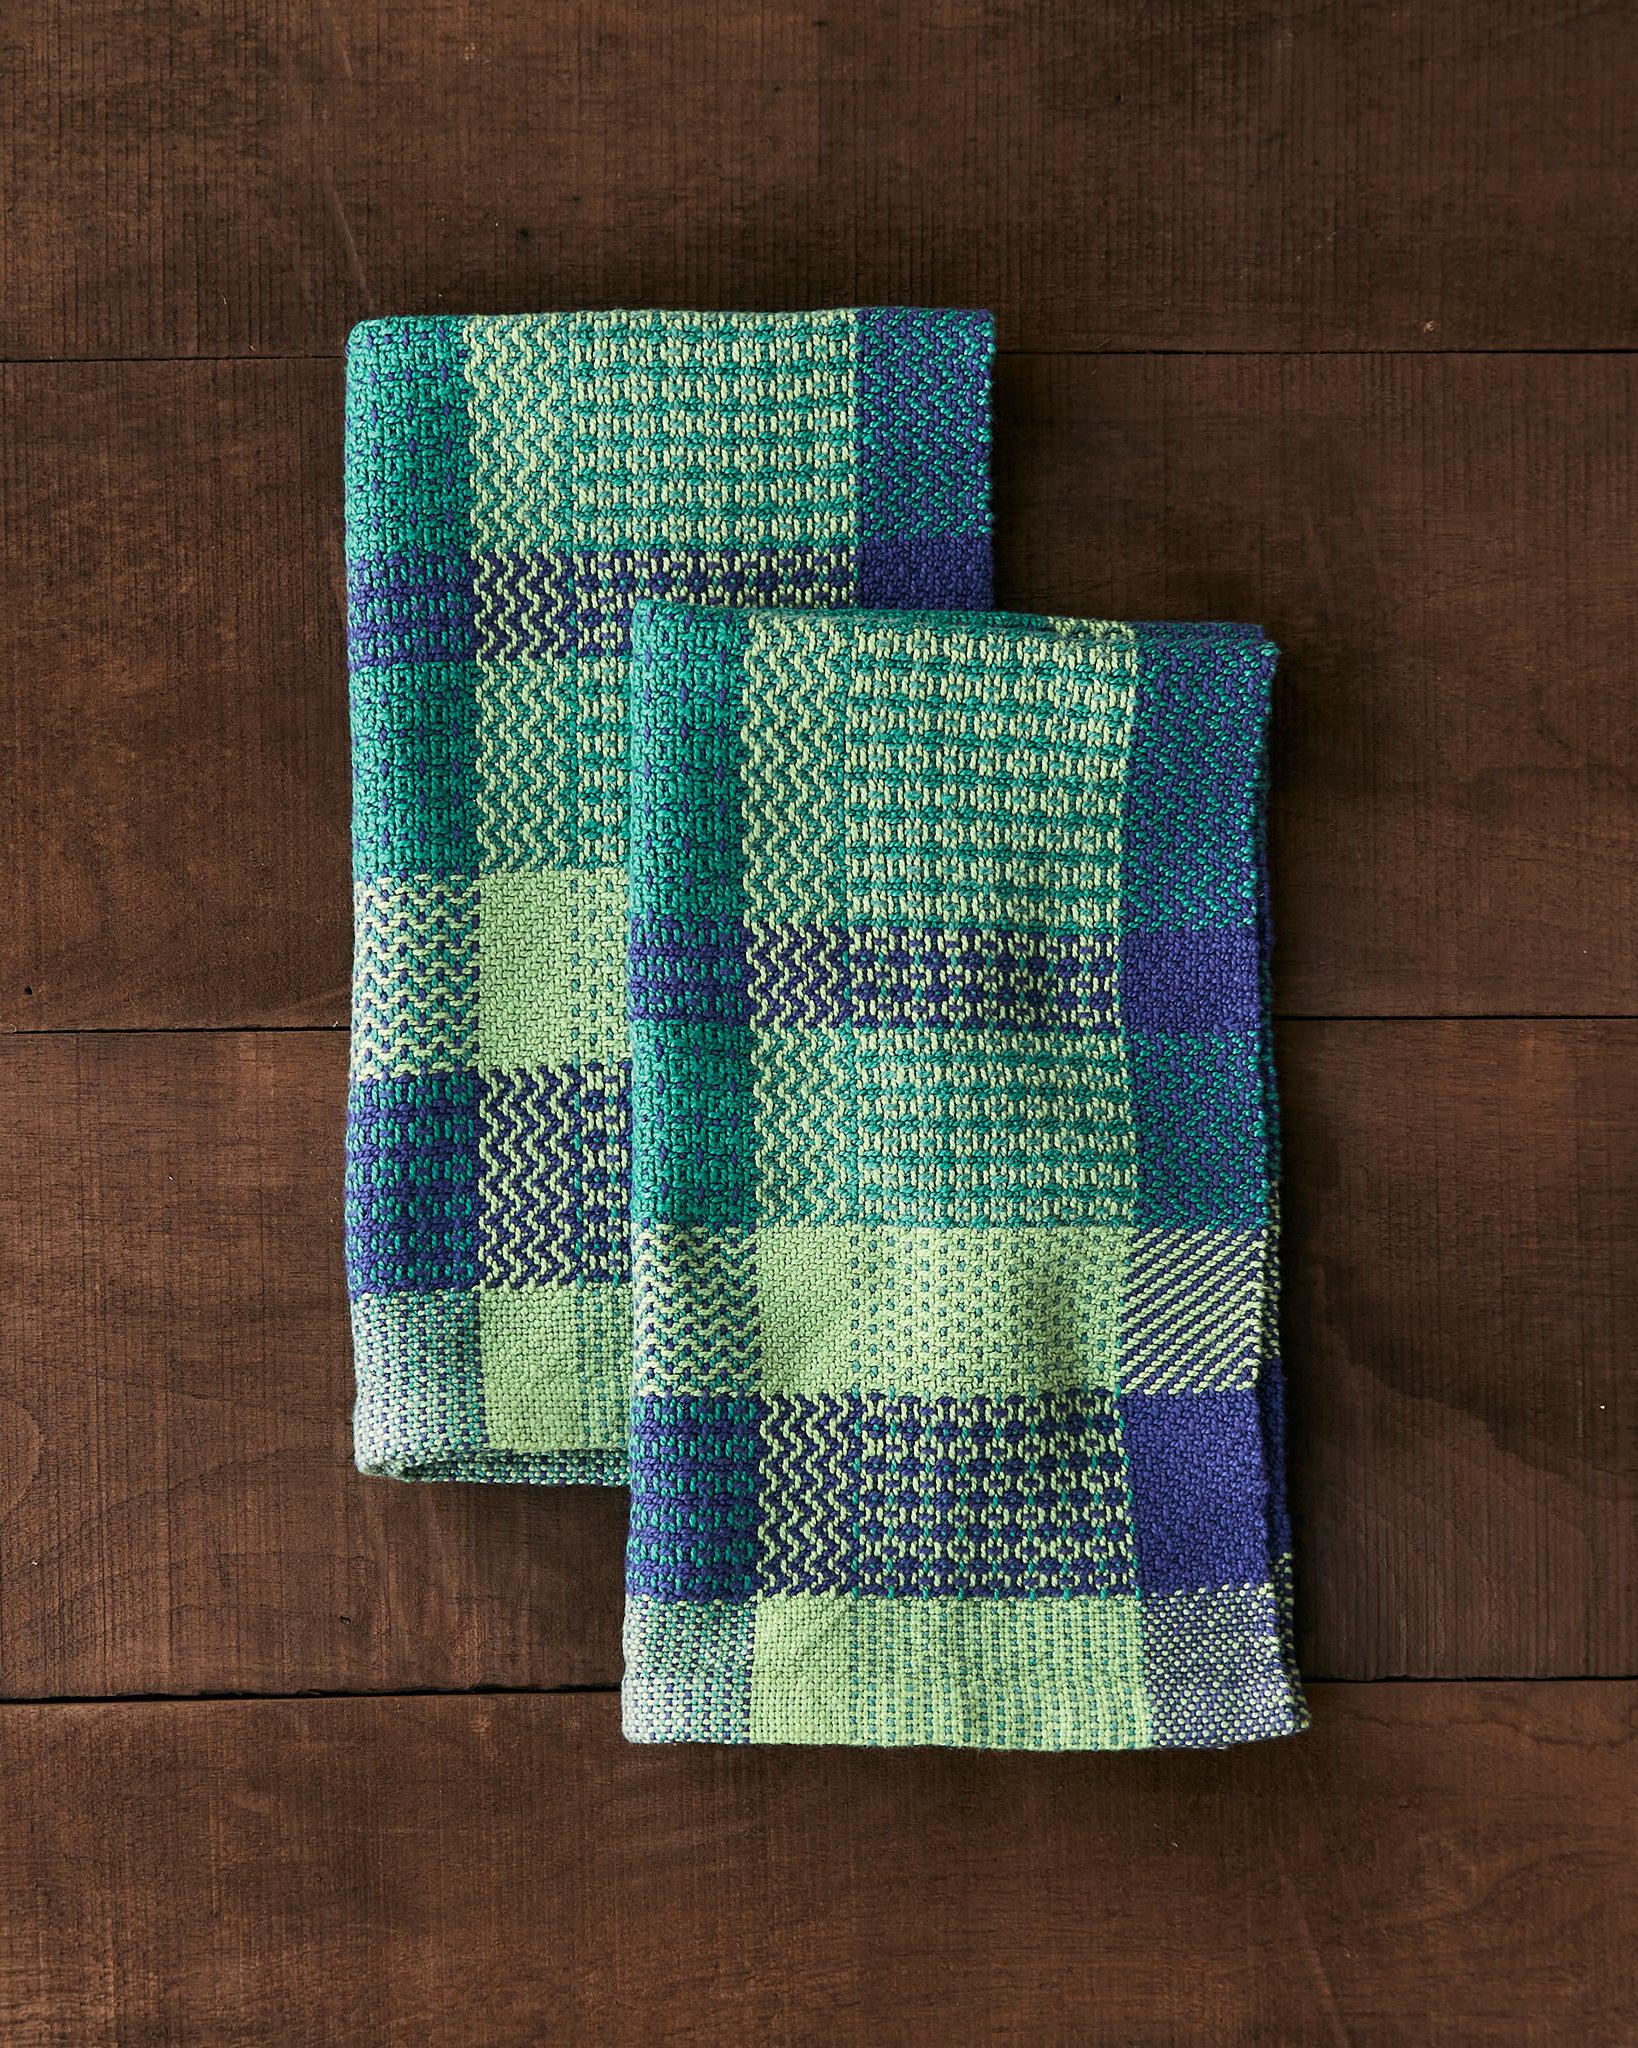 Designing With Color - Waffle Weave Towels